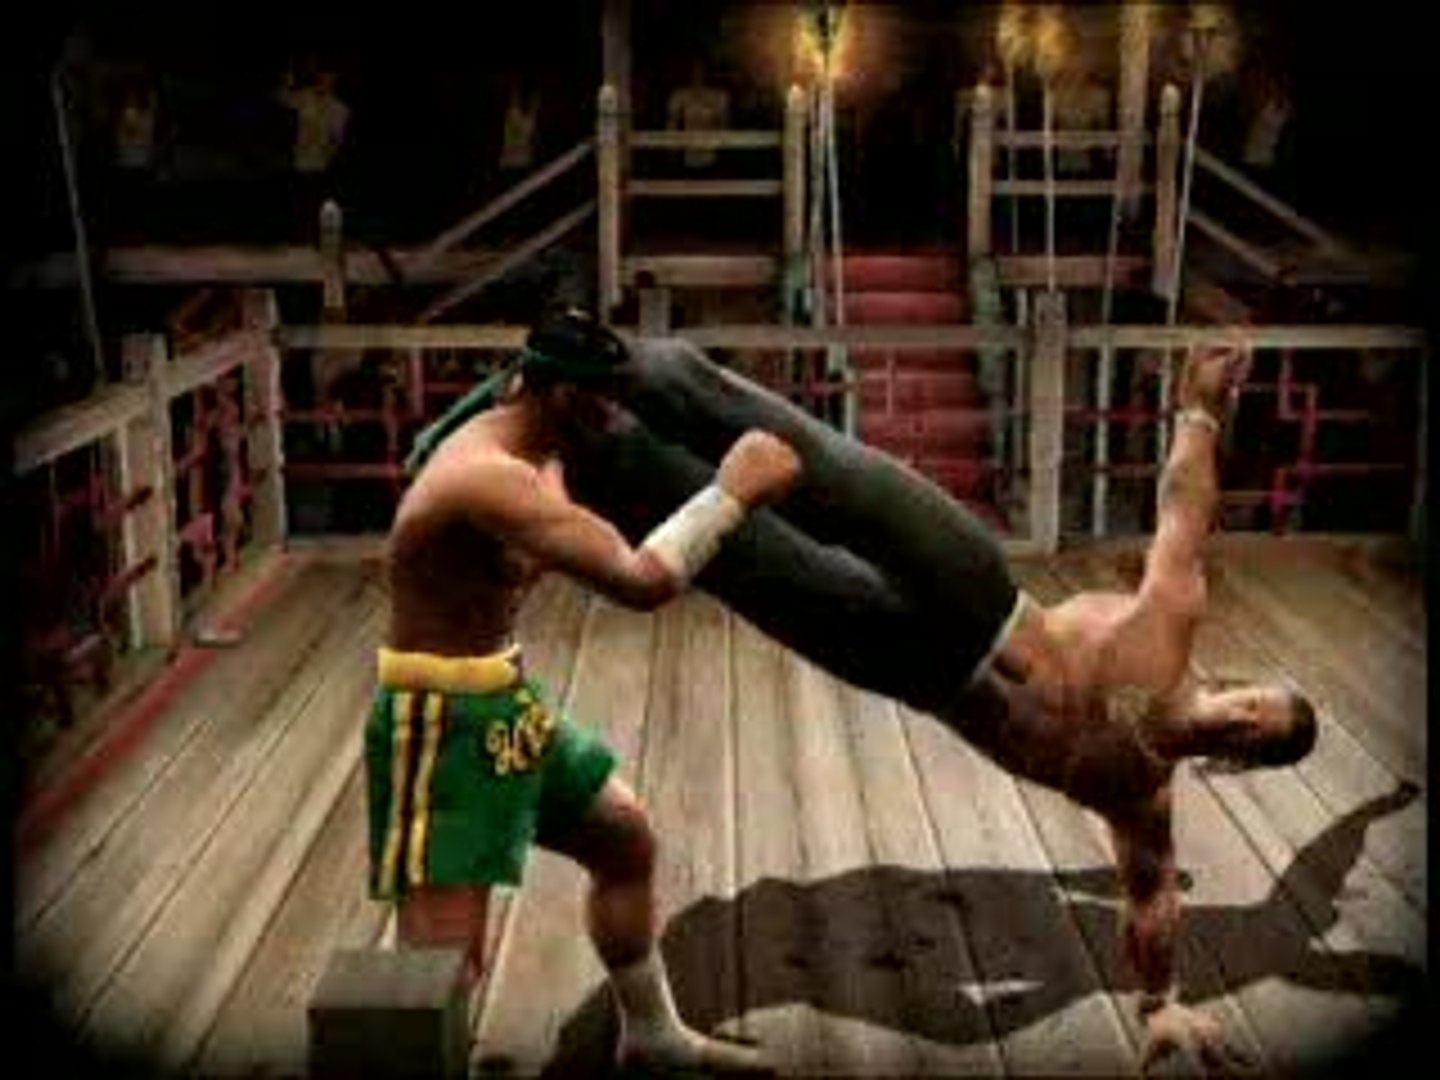 Def Jam Fight For NY - Redman in Action in Action Trailer